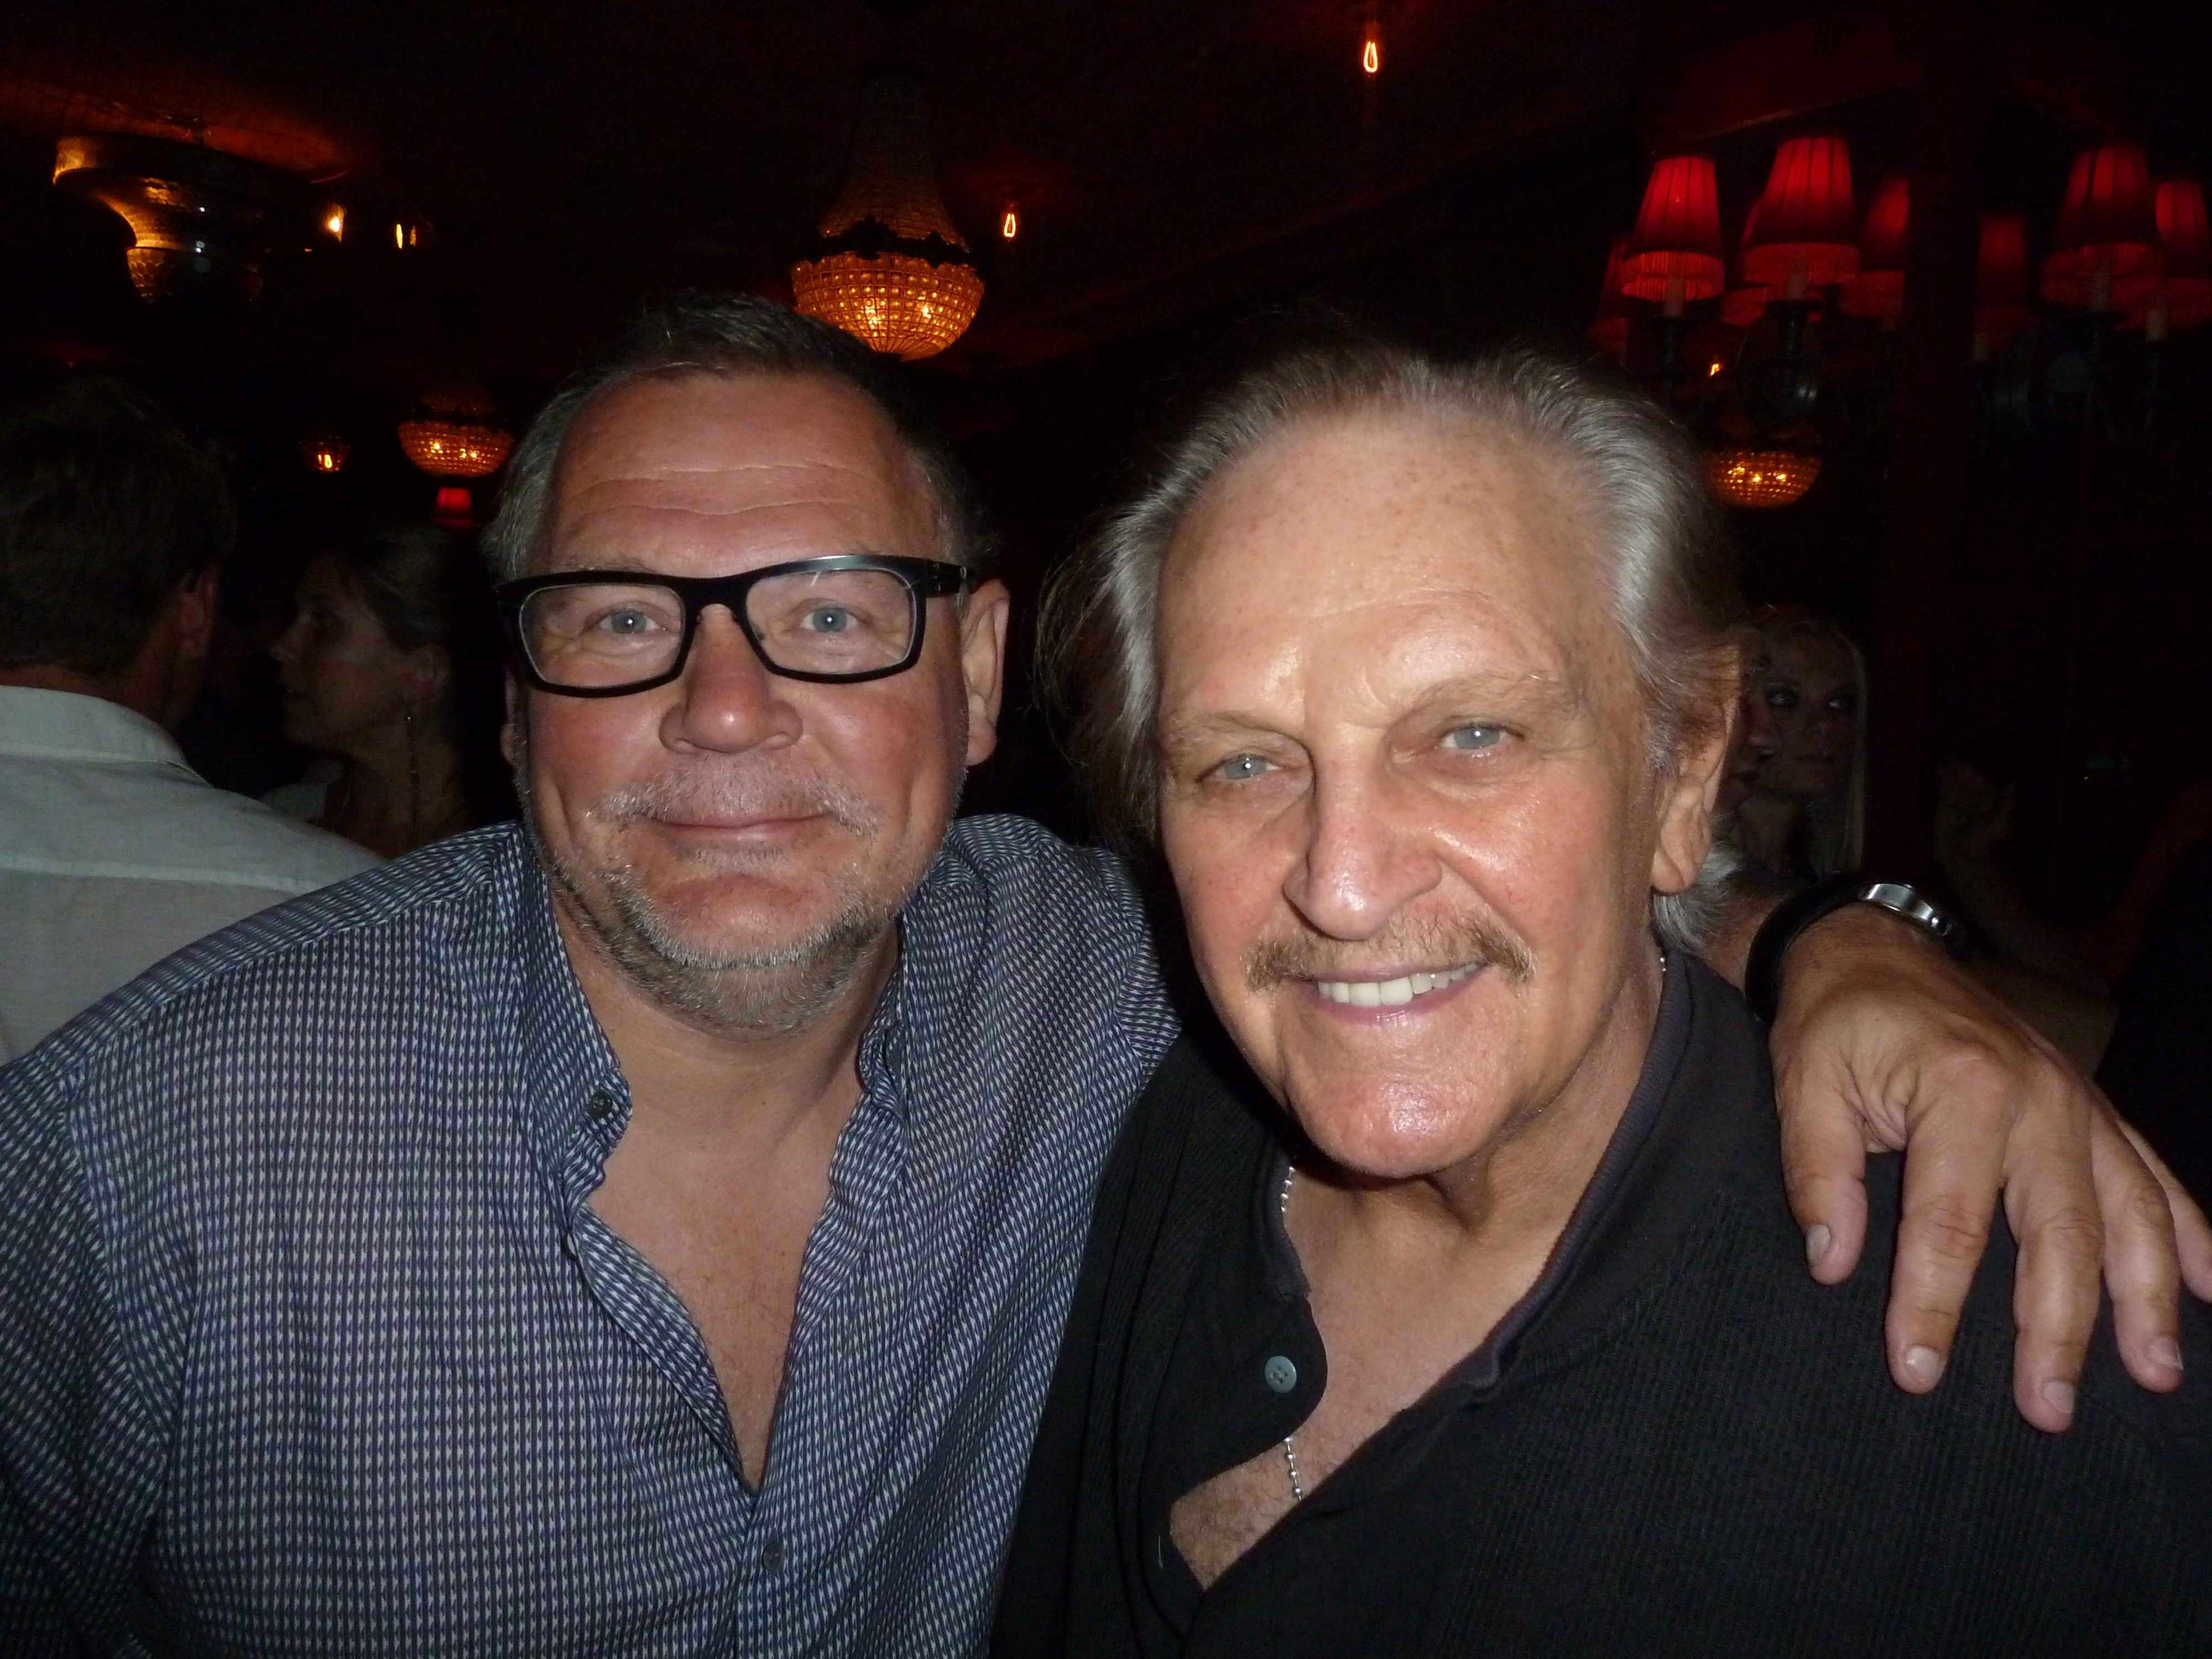 ED METZGER, actor, with JANUSZ KAMINSKI, Oscar winner, director, at wrap party for the film AMERICAN DREAM. KAMINSKI has won Oscars as cinematographer for Saving Pvt. Ryan and Schindler's List.